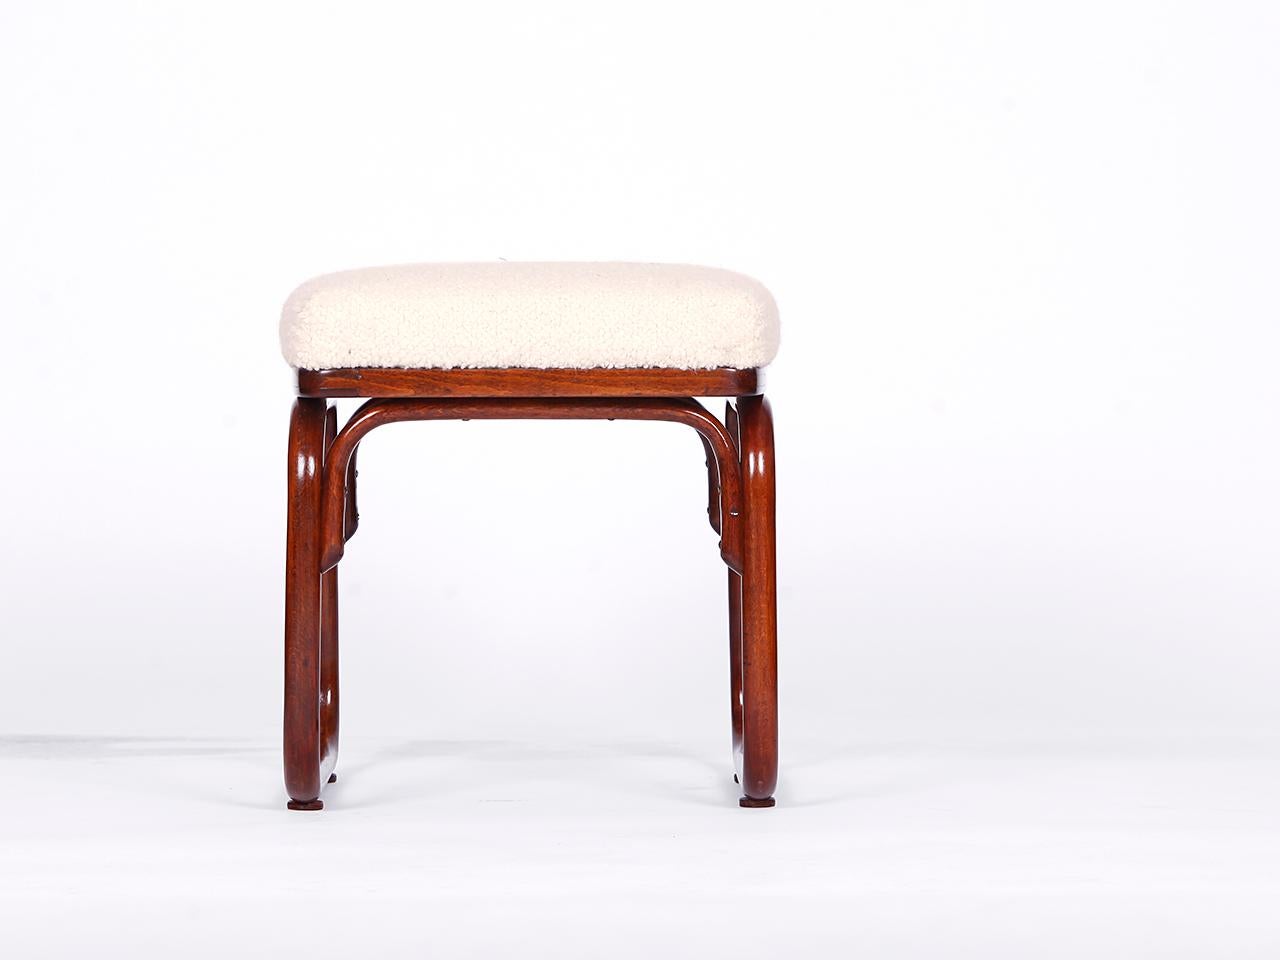 Designed by Josef Frank for Thonet in the 1920s, with paper label. The upholstery consists of a coconut fiber core, covered with a wonderfully soft English boucle cover made of wool. Completely restored.